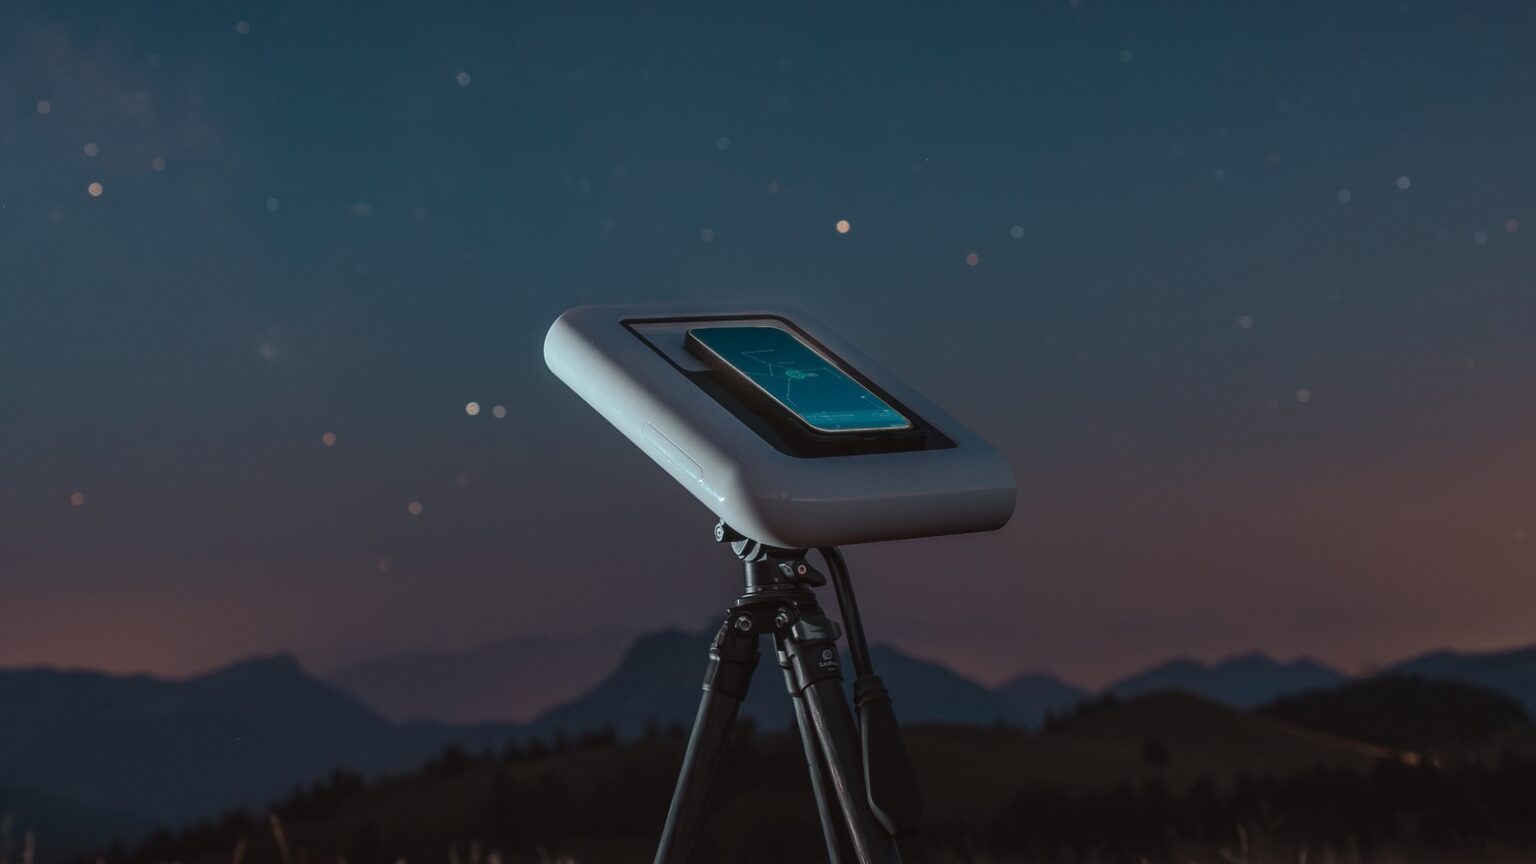 Hestia merges telescope with iPhone for easy celestial photography